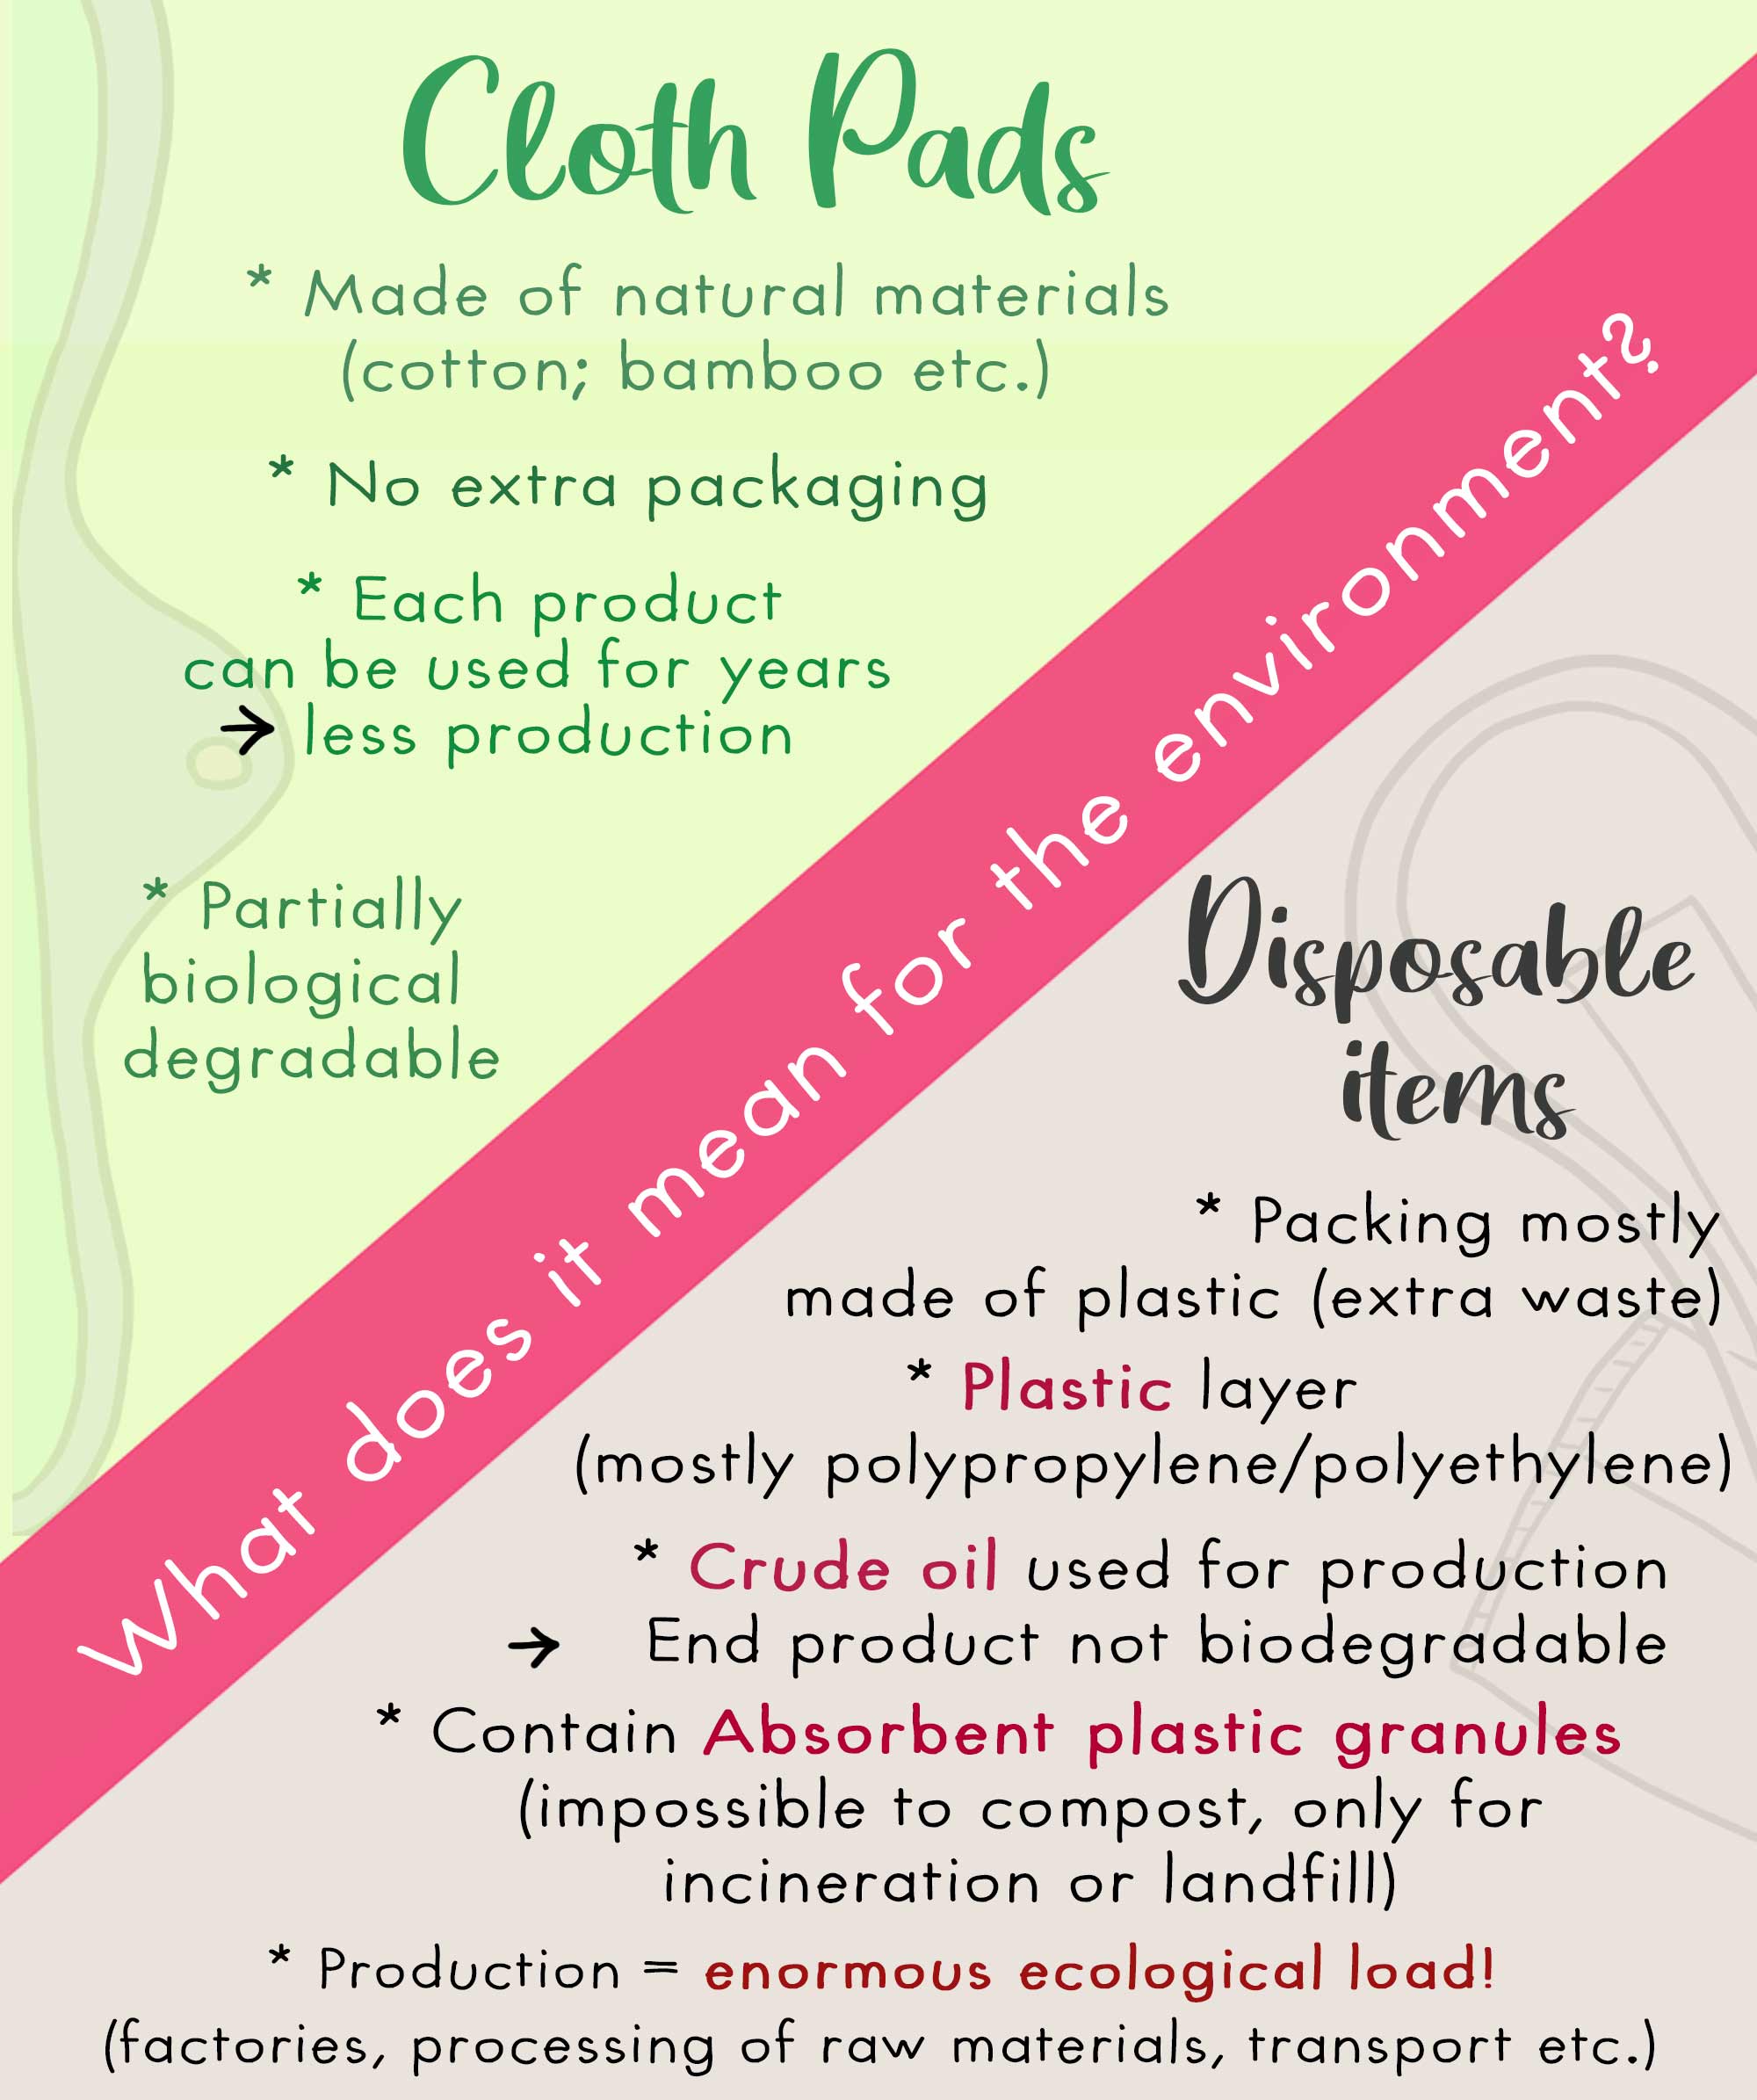 What does it mean for the environment? Cloth pads, made of natural materials (cotton, bamboo etc.), no extra packaging, each product can be used for years less production, partially biodegradable. Disposable items, packing mostly made of plastic (extra wa